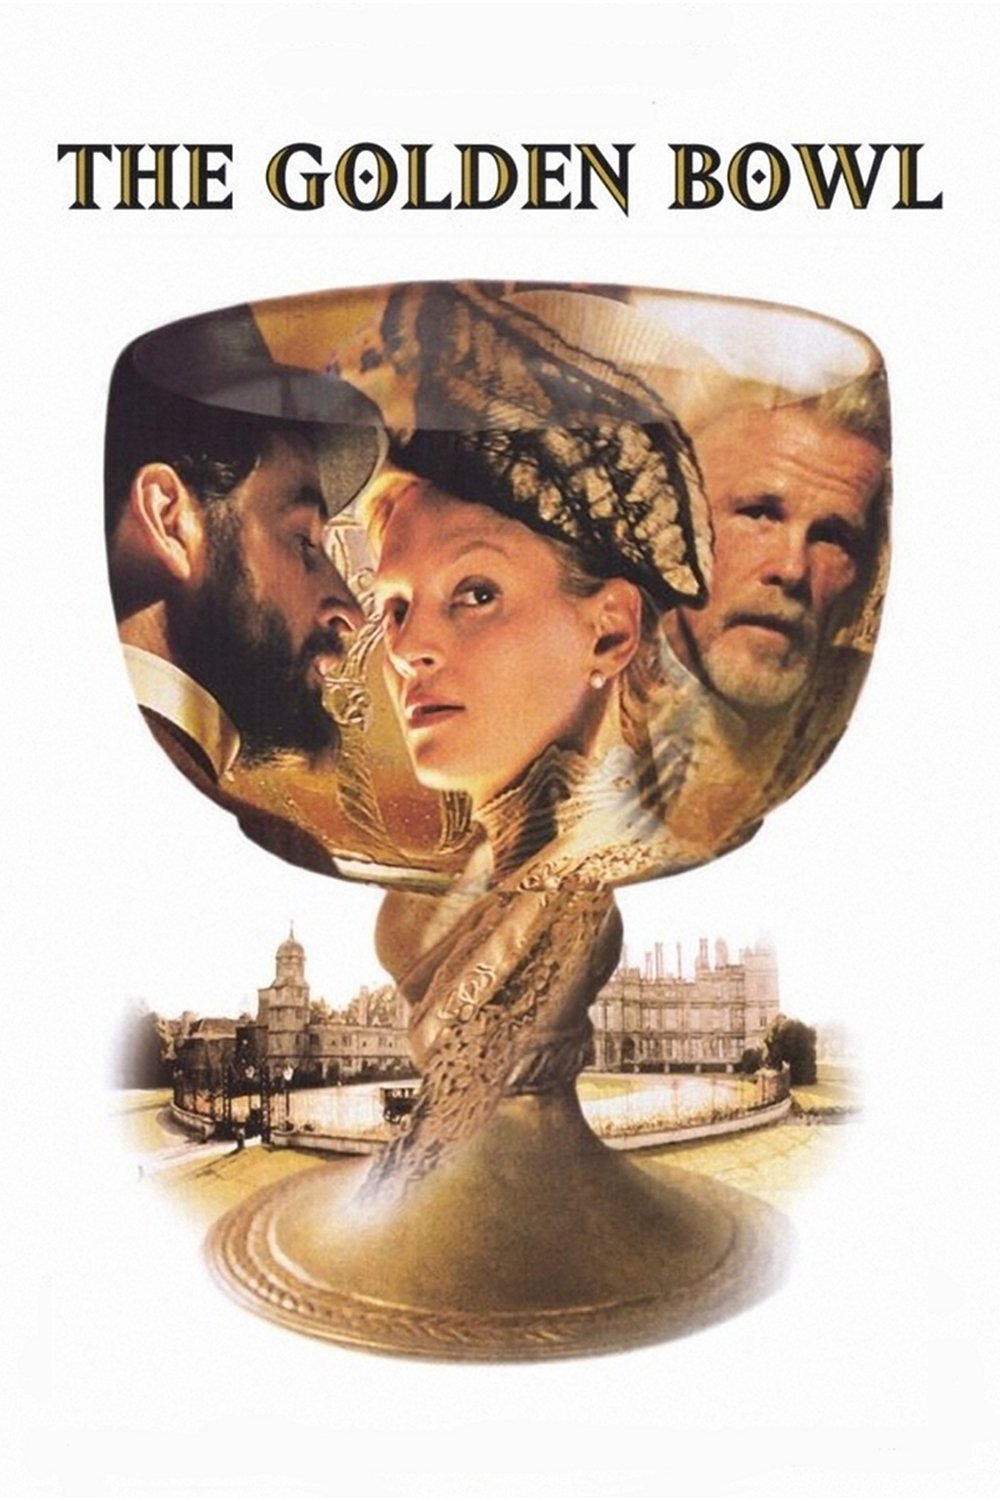 Poster for the movie "The Golden Bowl"